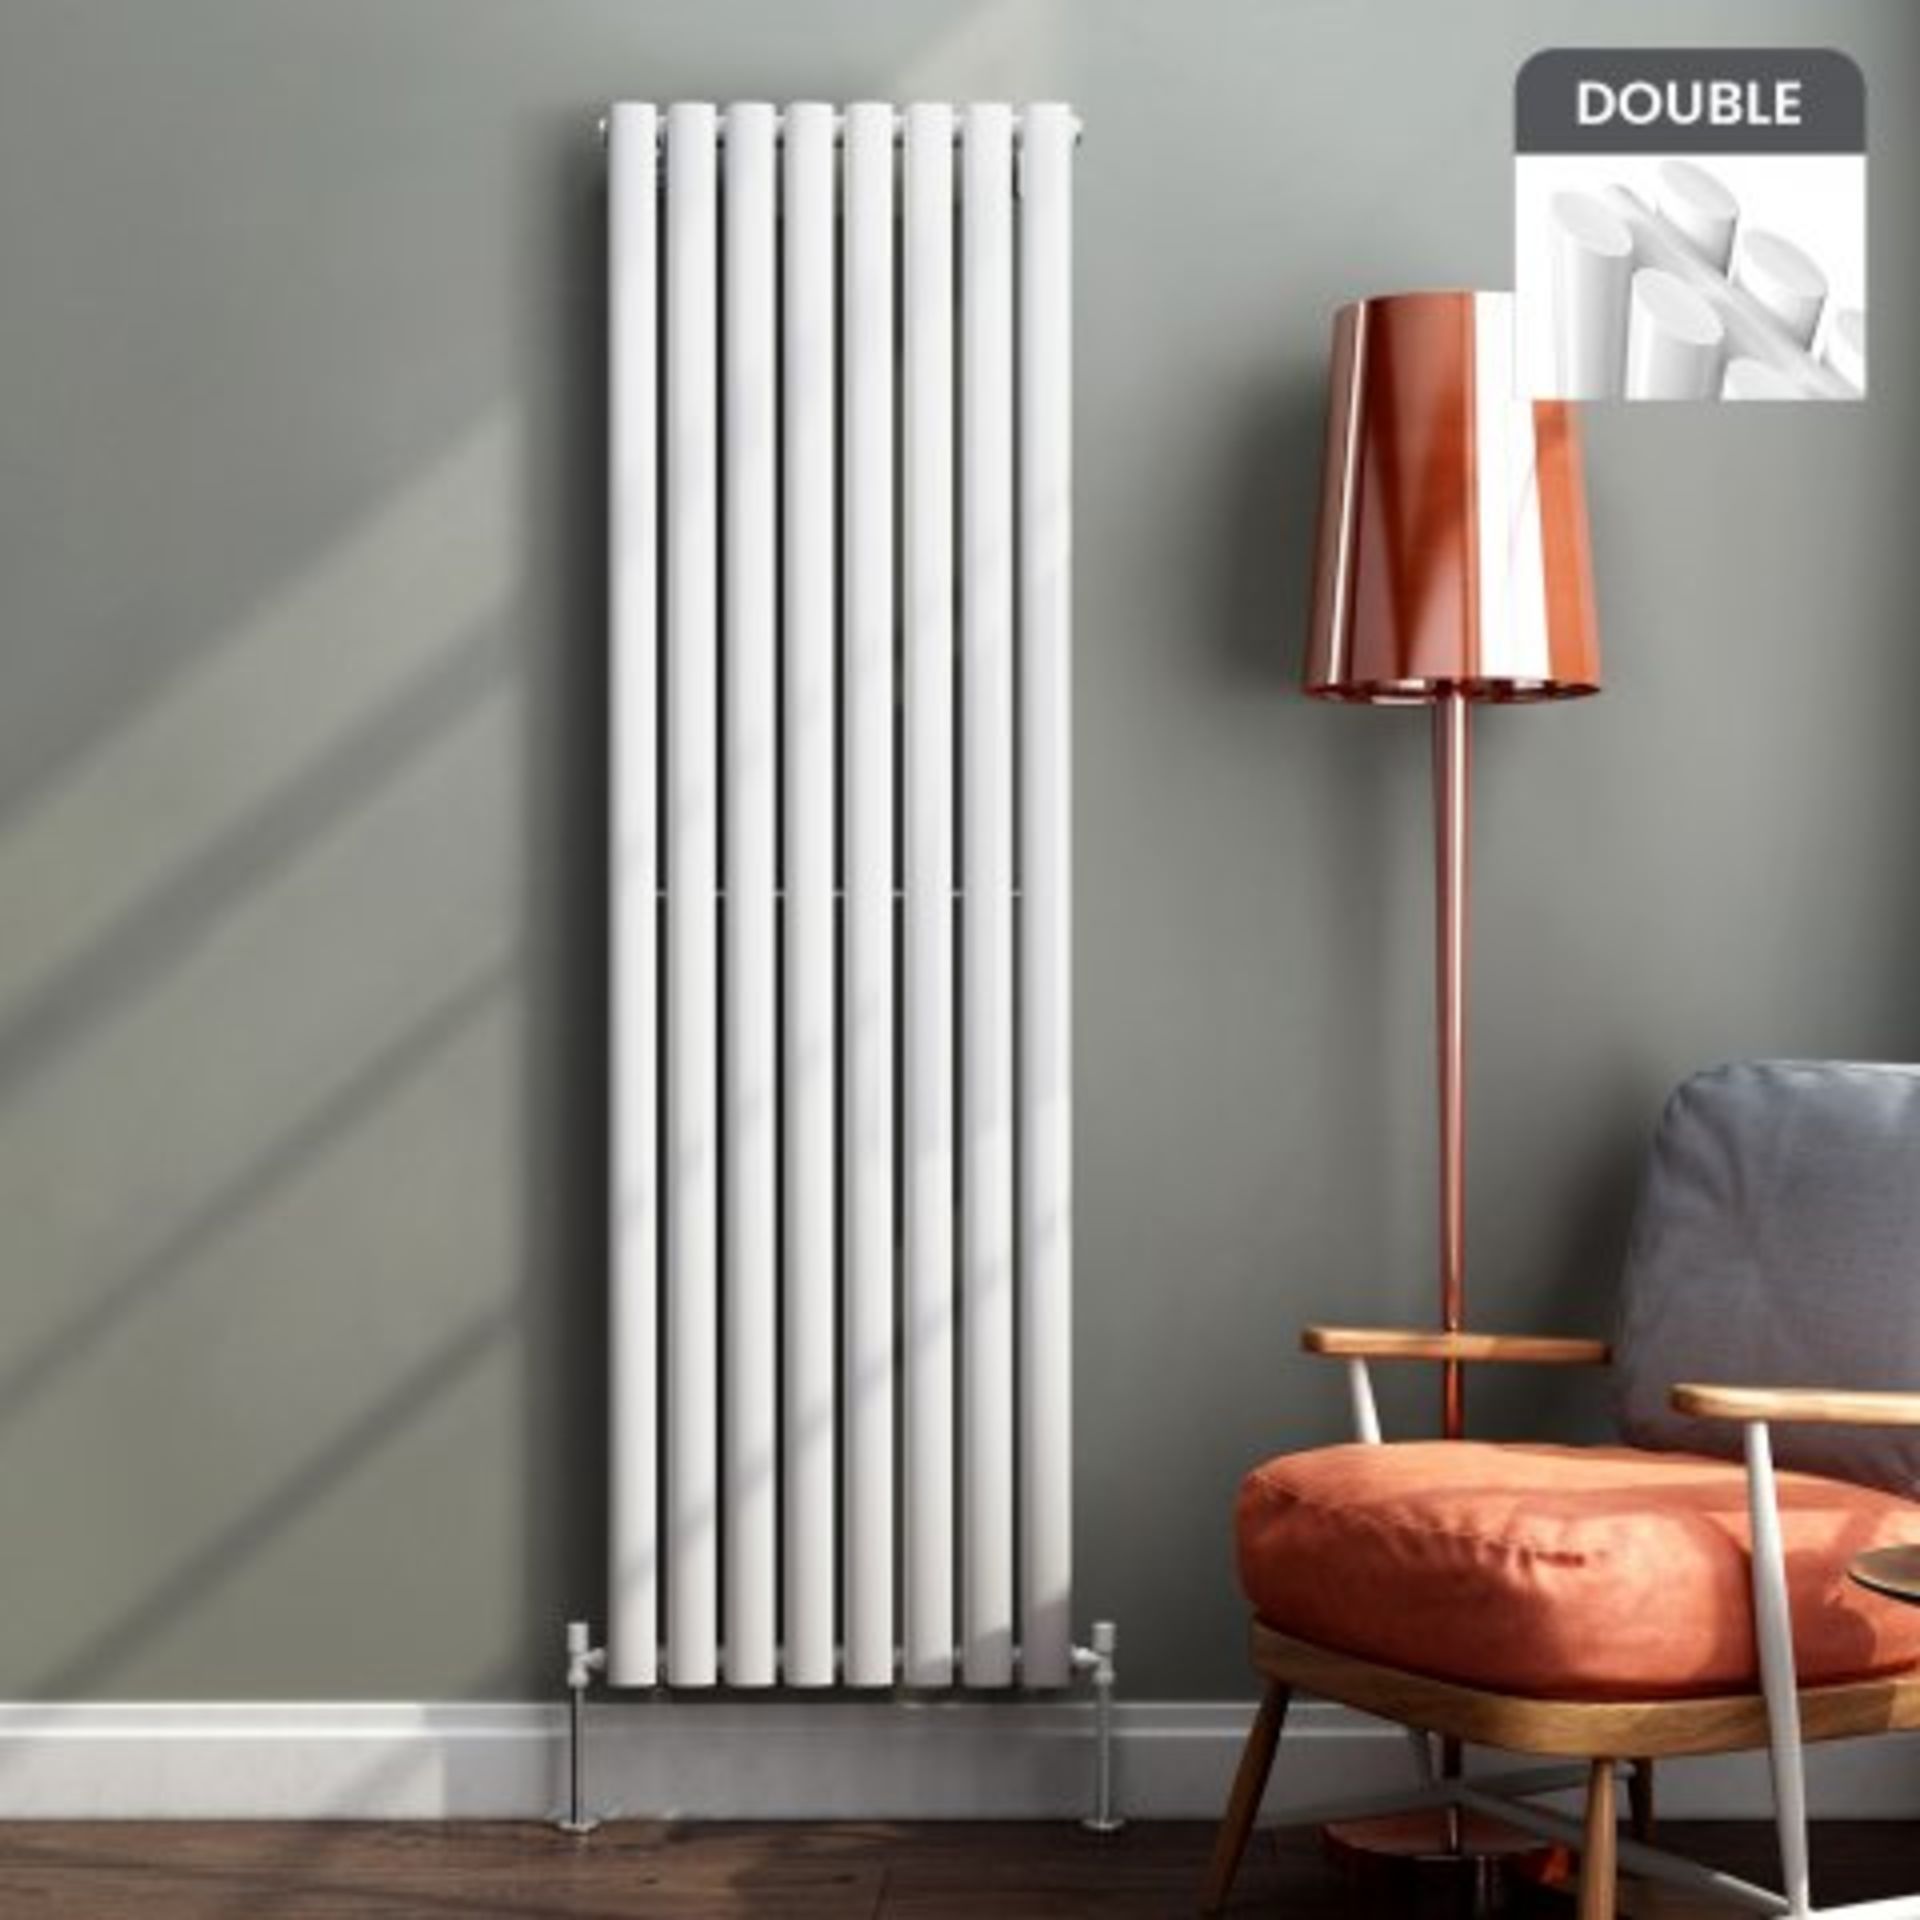 (I6) 1600x480mm Gloss White Double Oval Tube Vertical Radiator RRP £305.99 Designer Touch This